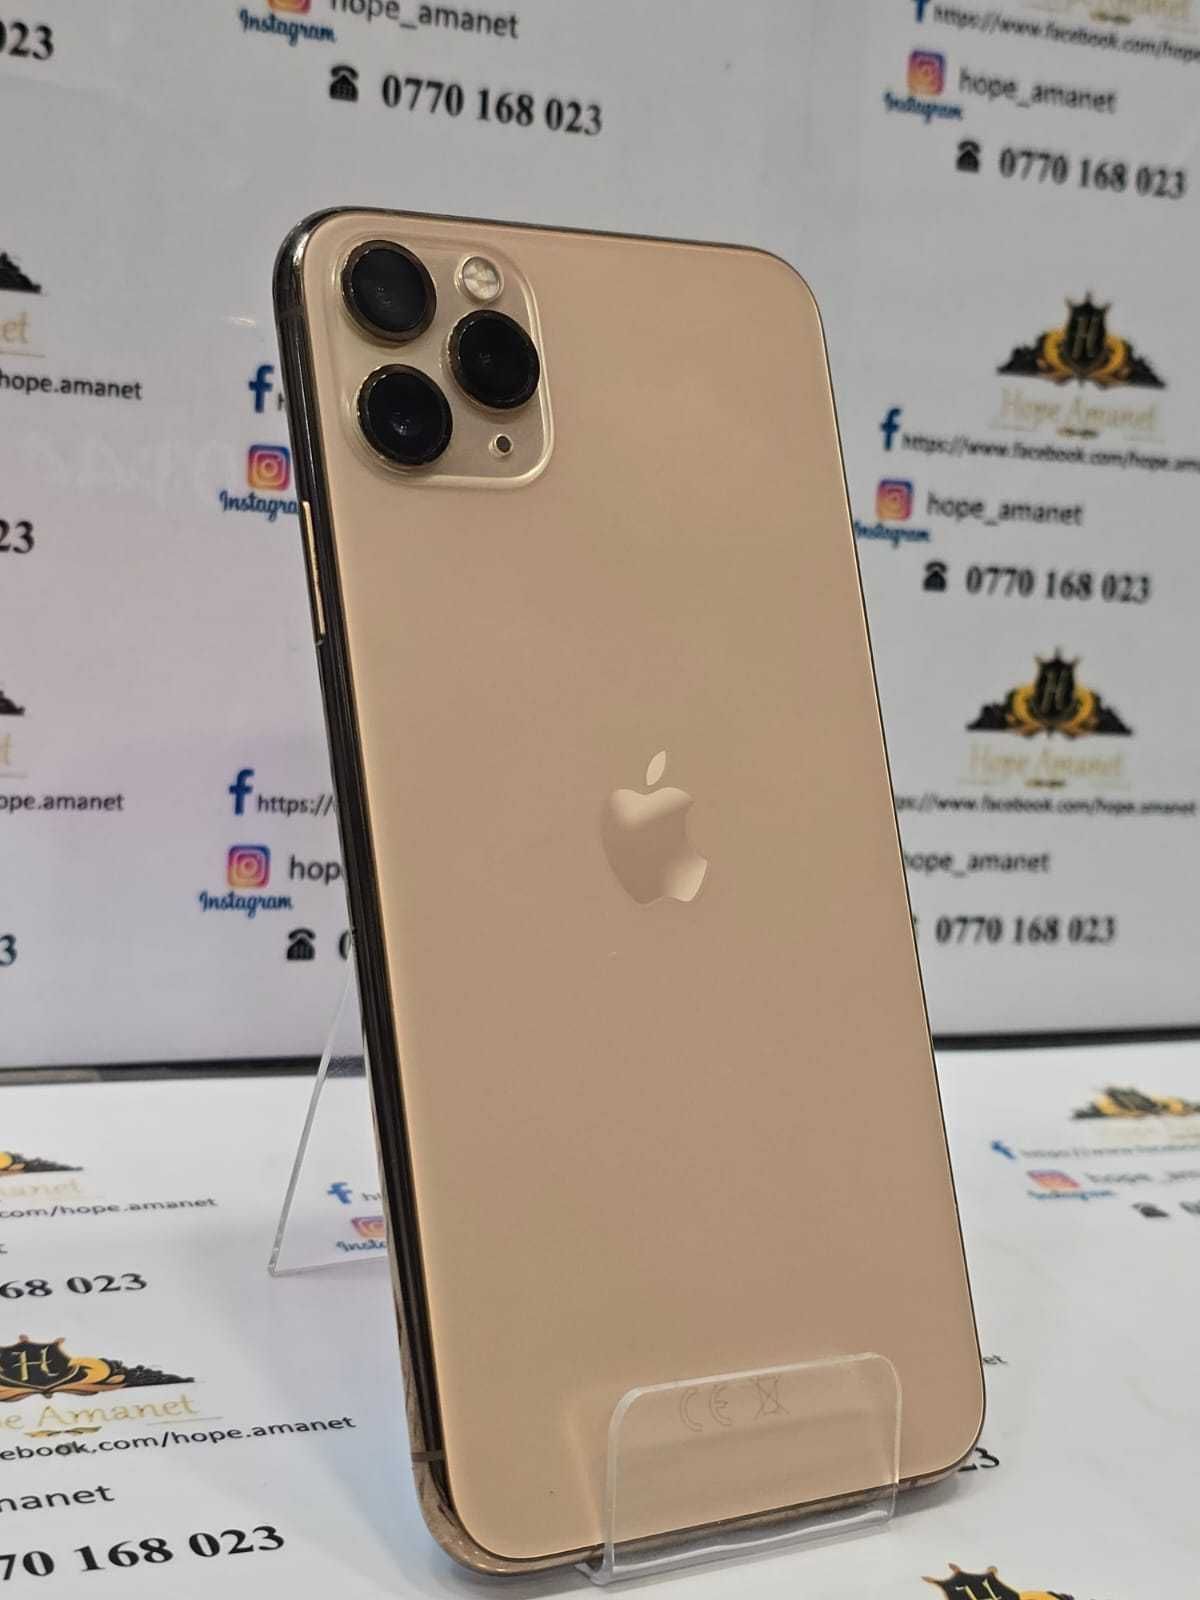 Hope Amanet P7 Iphone 11 Pro Max Gold